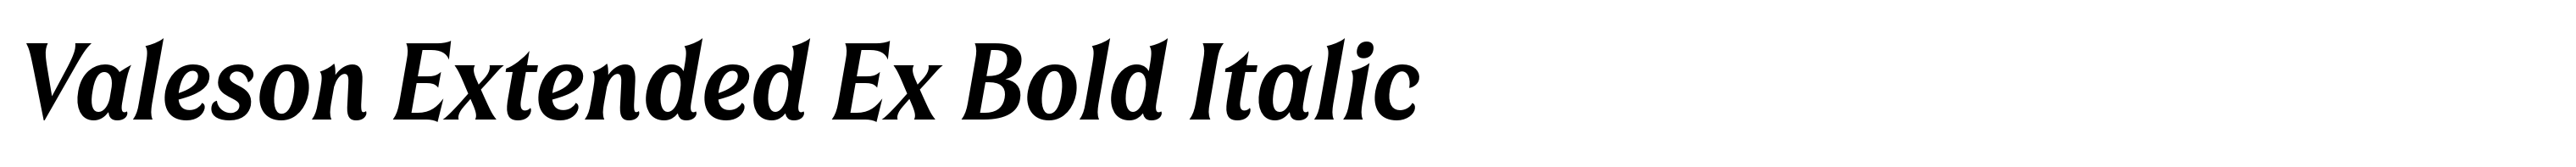 Valeson Extended Ex Bold Italic